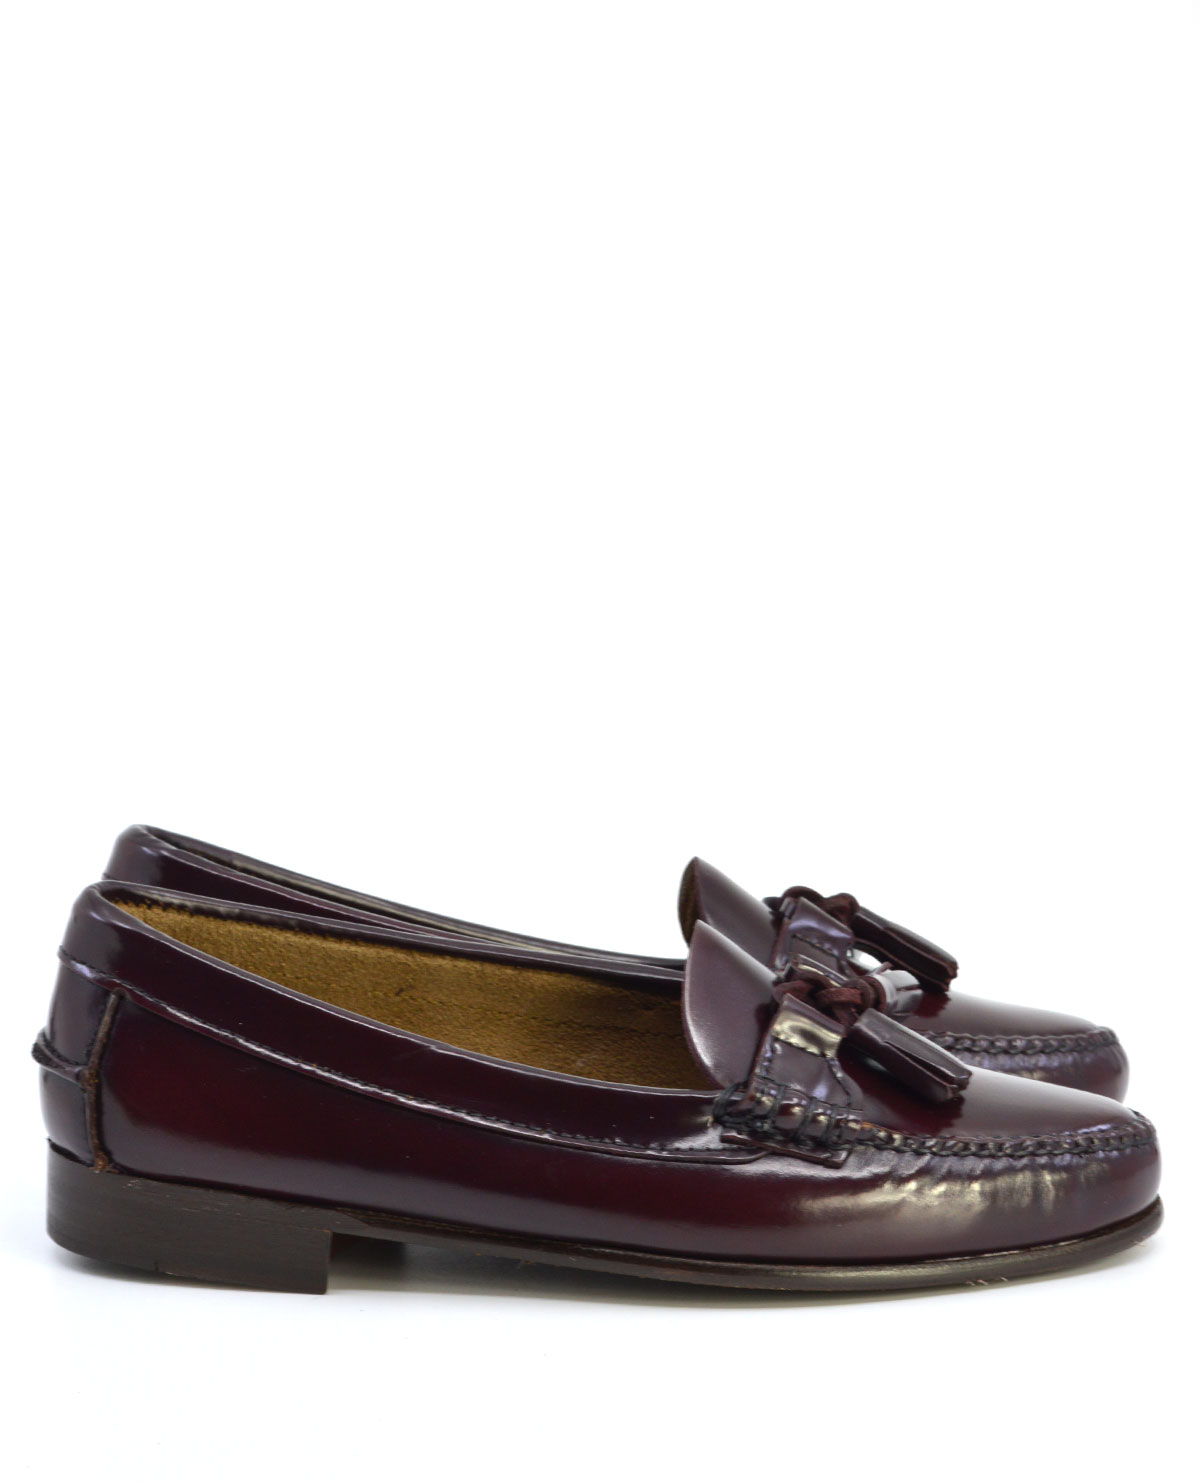 Ladies Oxblood Tassel Loafer with Leather Sole – The LaBelles – Mod Shoes